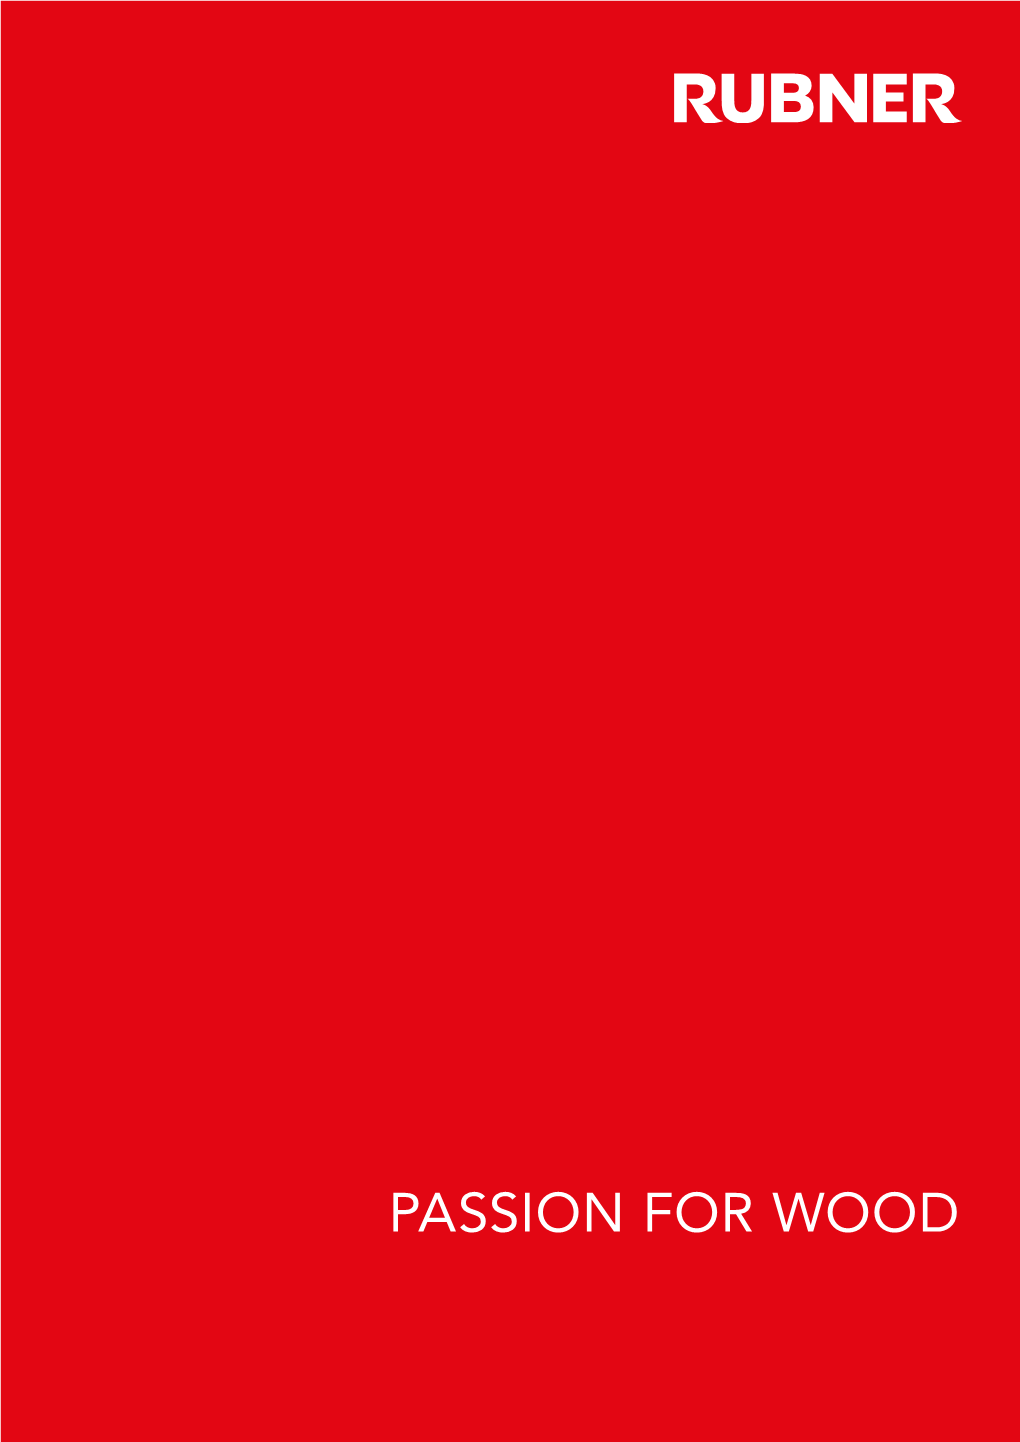 Passion for Wood – the Overall Rubner Group